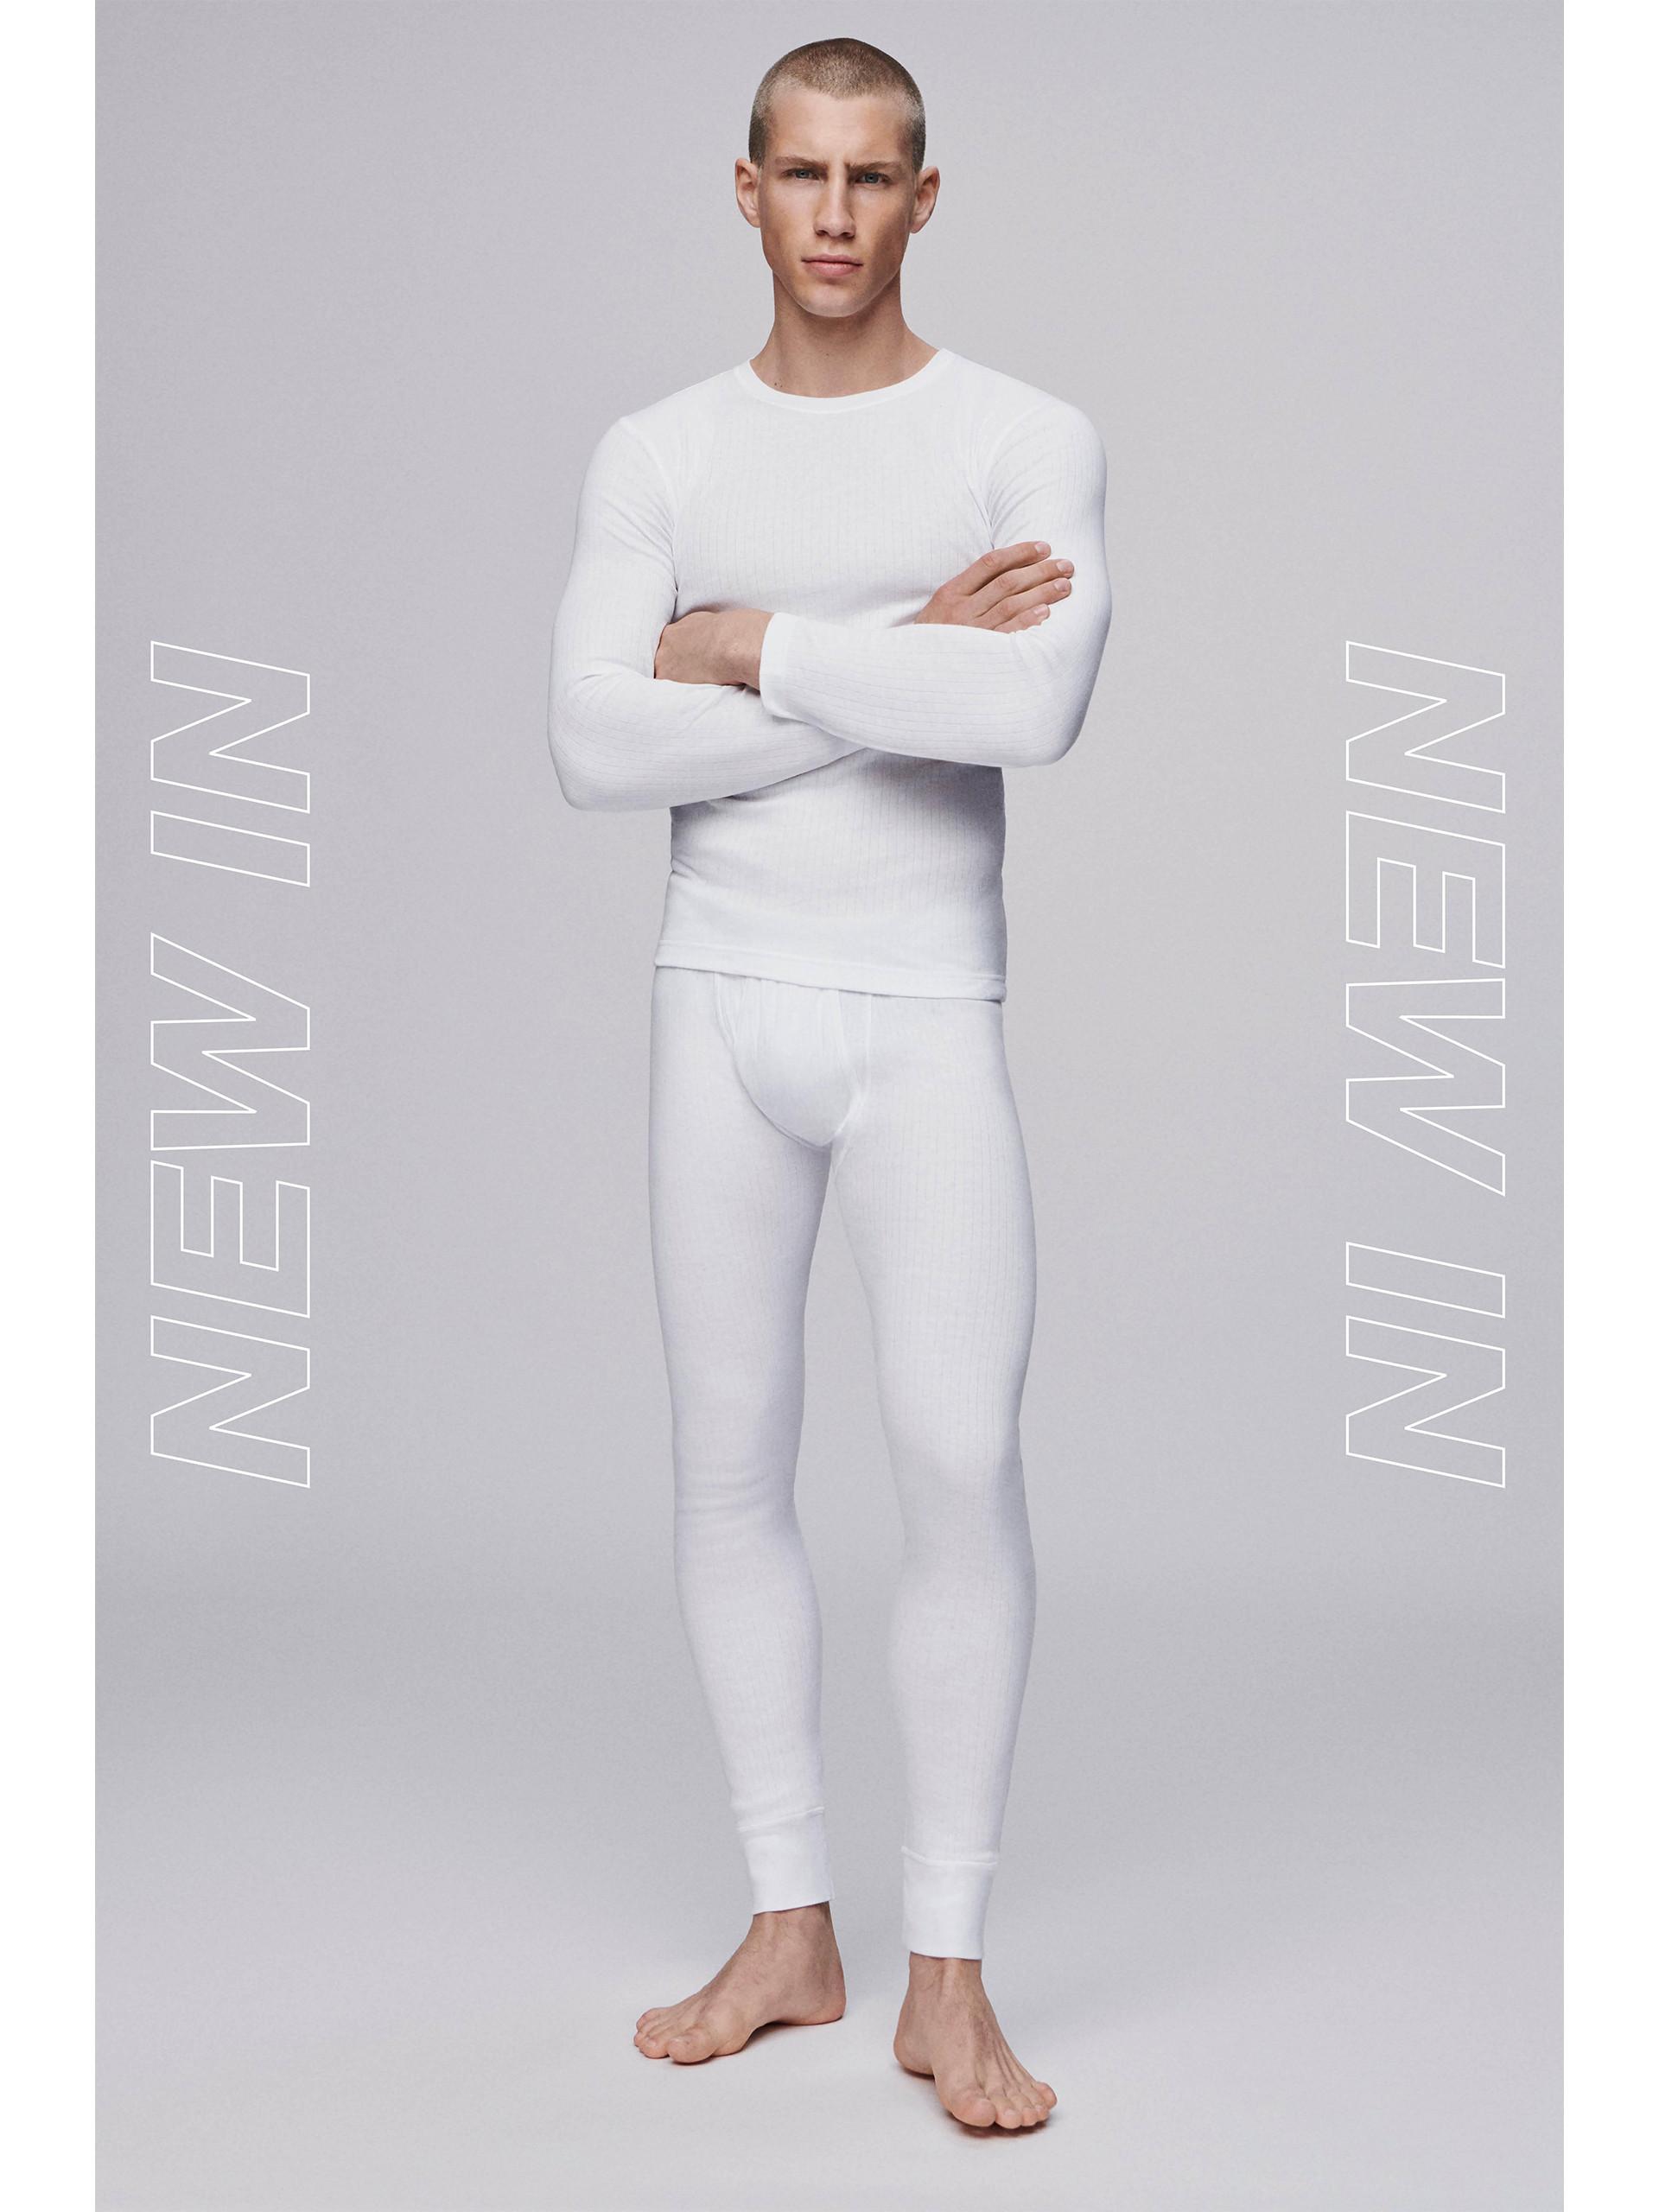 male model in white thermals